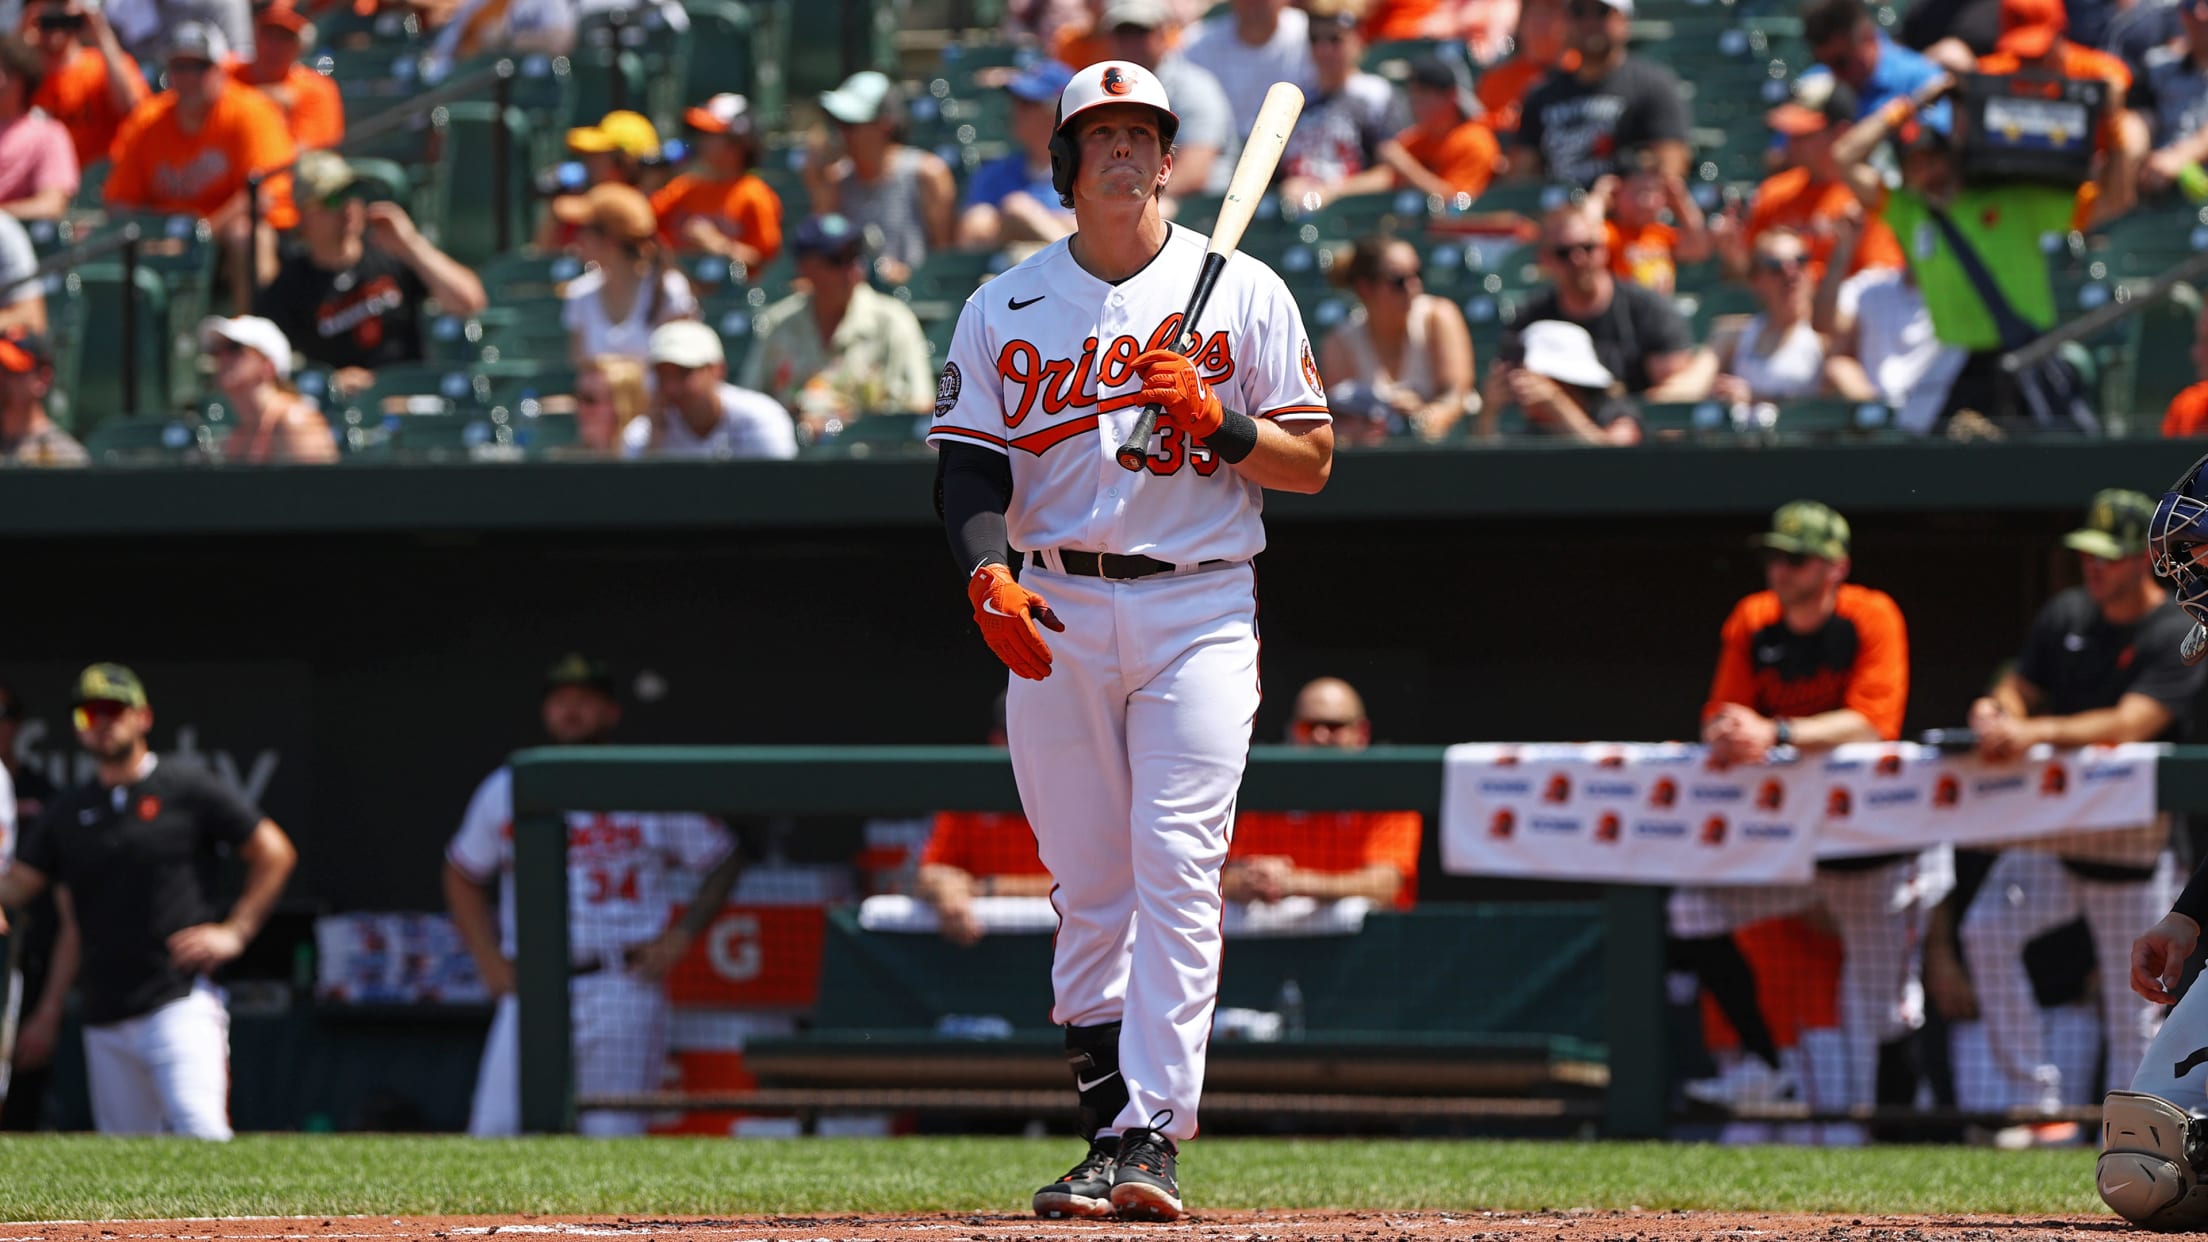 Orioles catcher Adley Rutschman Q&A: On baseball, rookie life and movies -  The Athletic